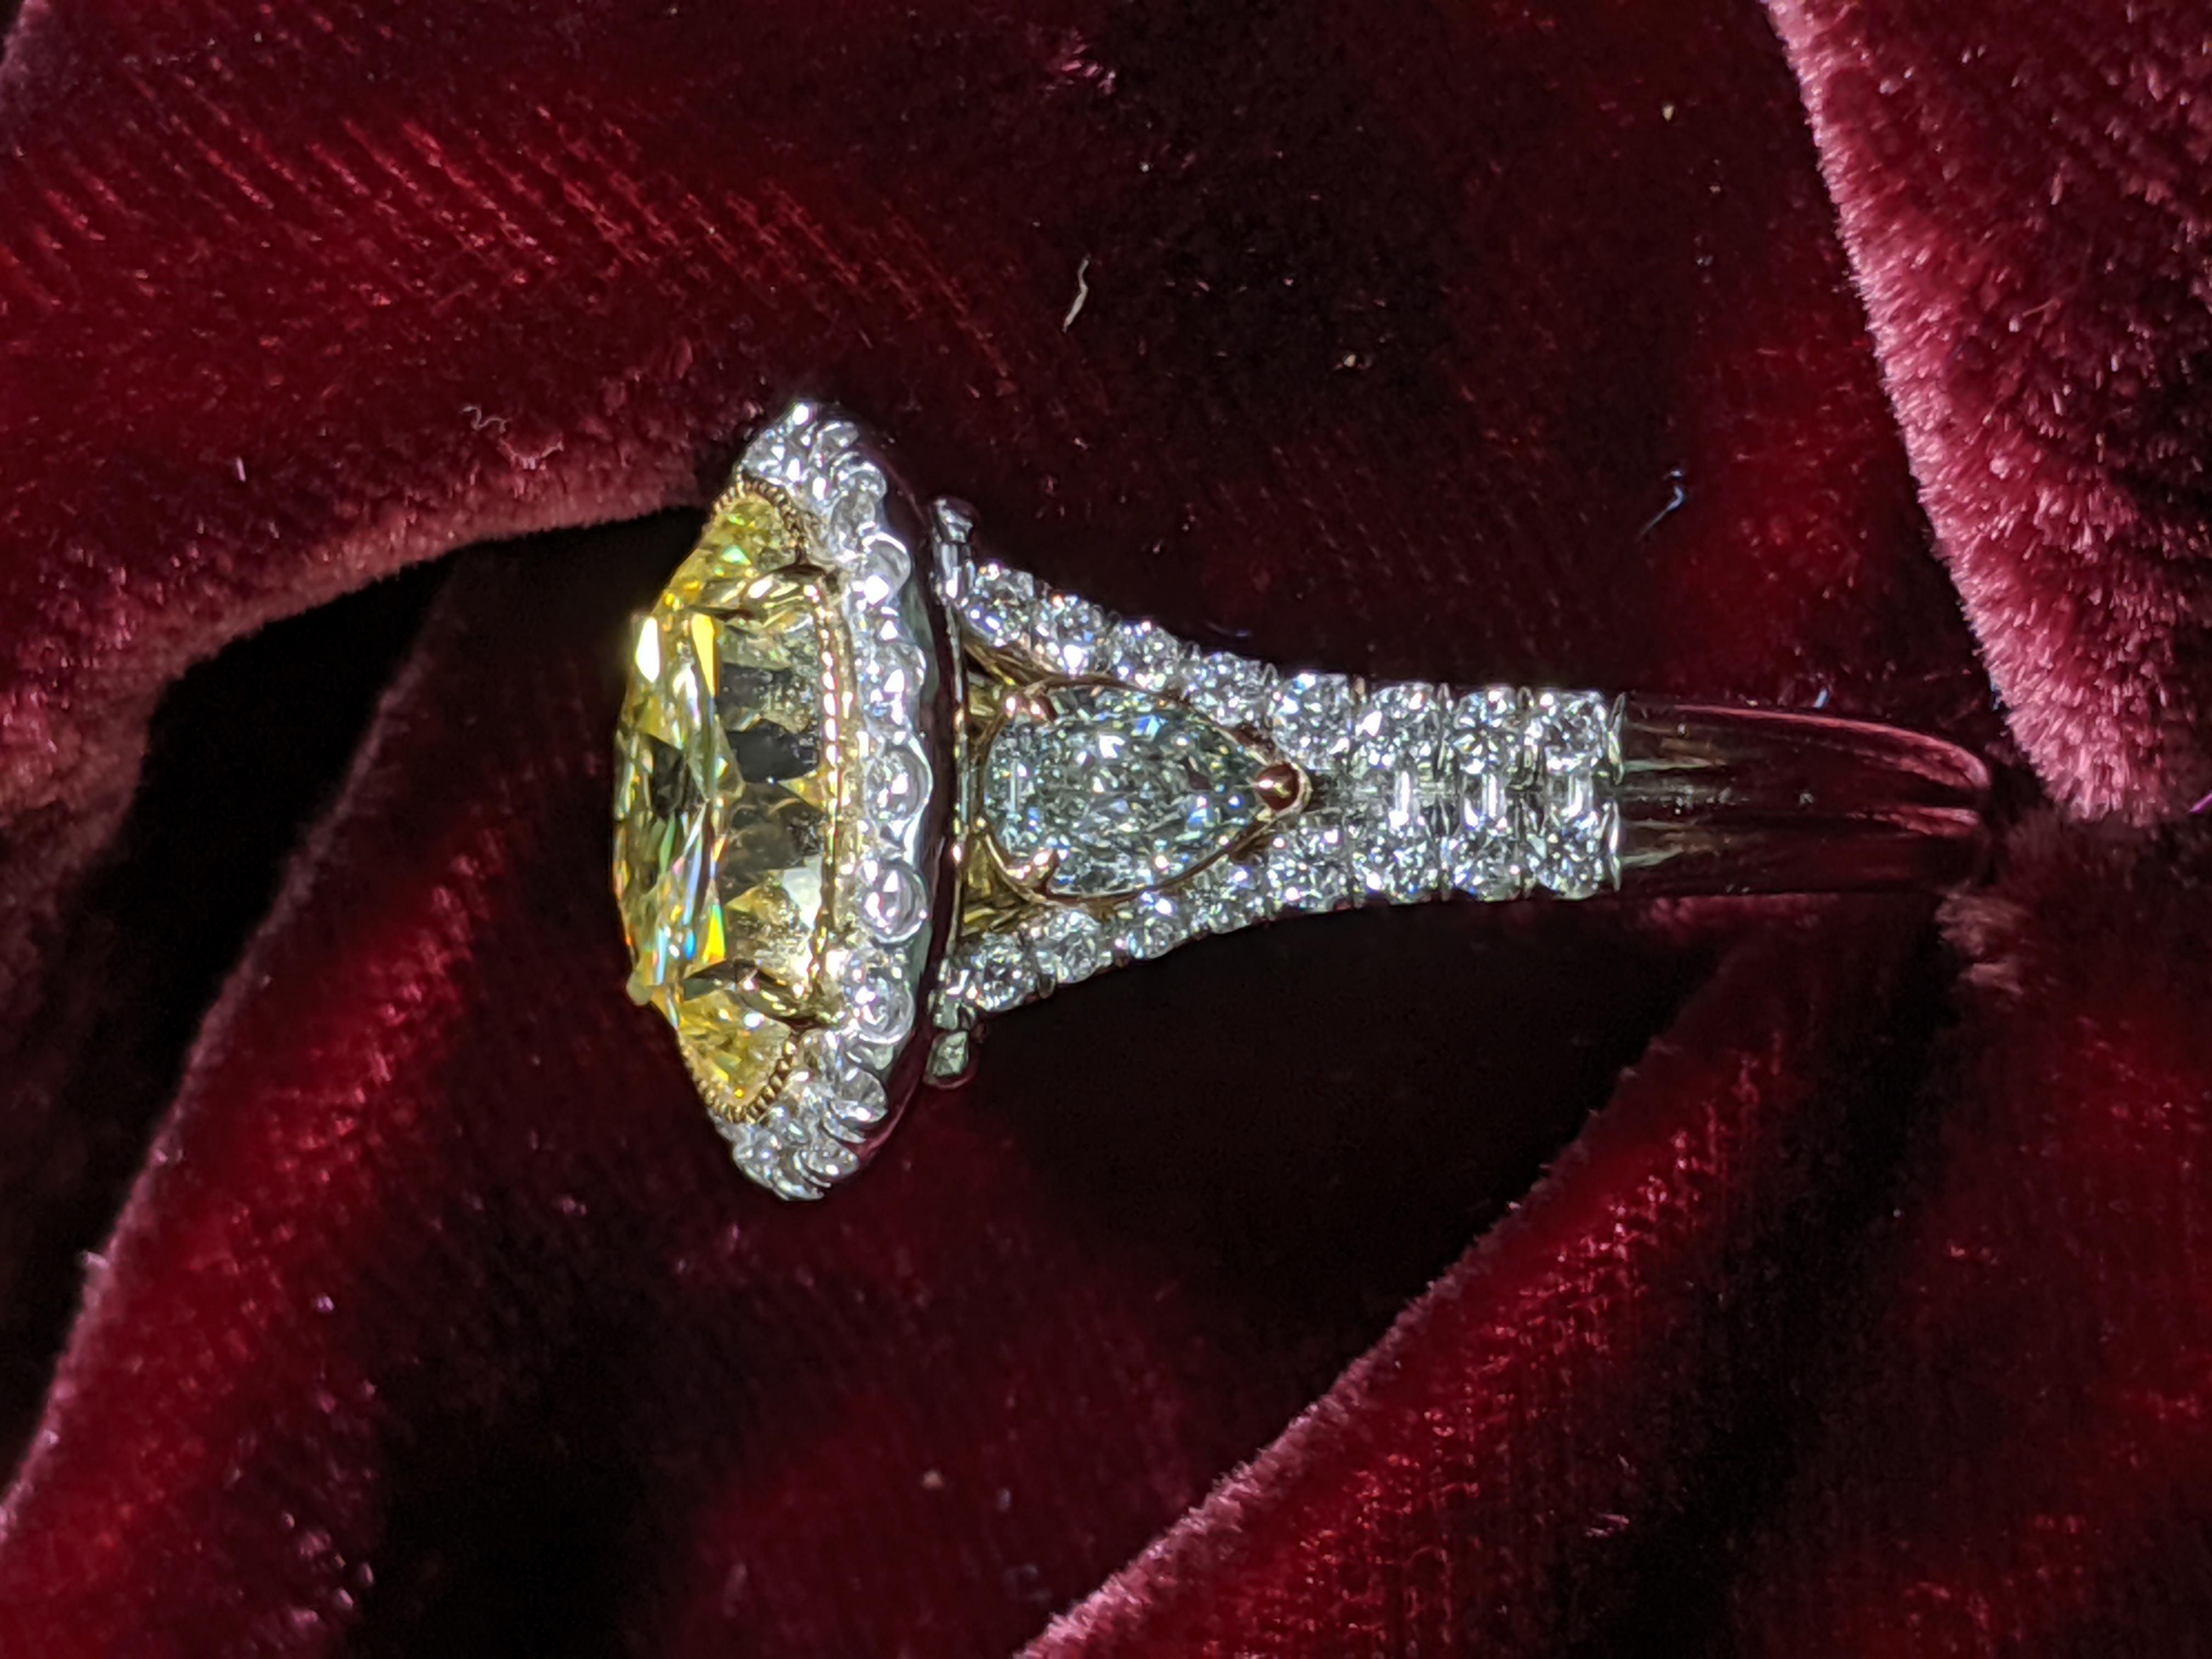 Rare SIX carat Fancy Intense Yellow Round Diamond mounted in a handmade Platinum mounting with side pear shape diamonds and smaller white diamond outline.  The ROUND shape is extremely rare in natural fancy color diamonds and definitely make a